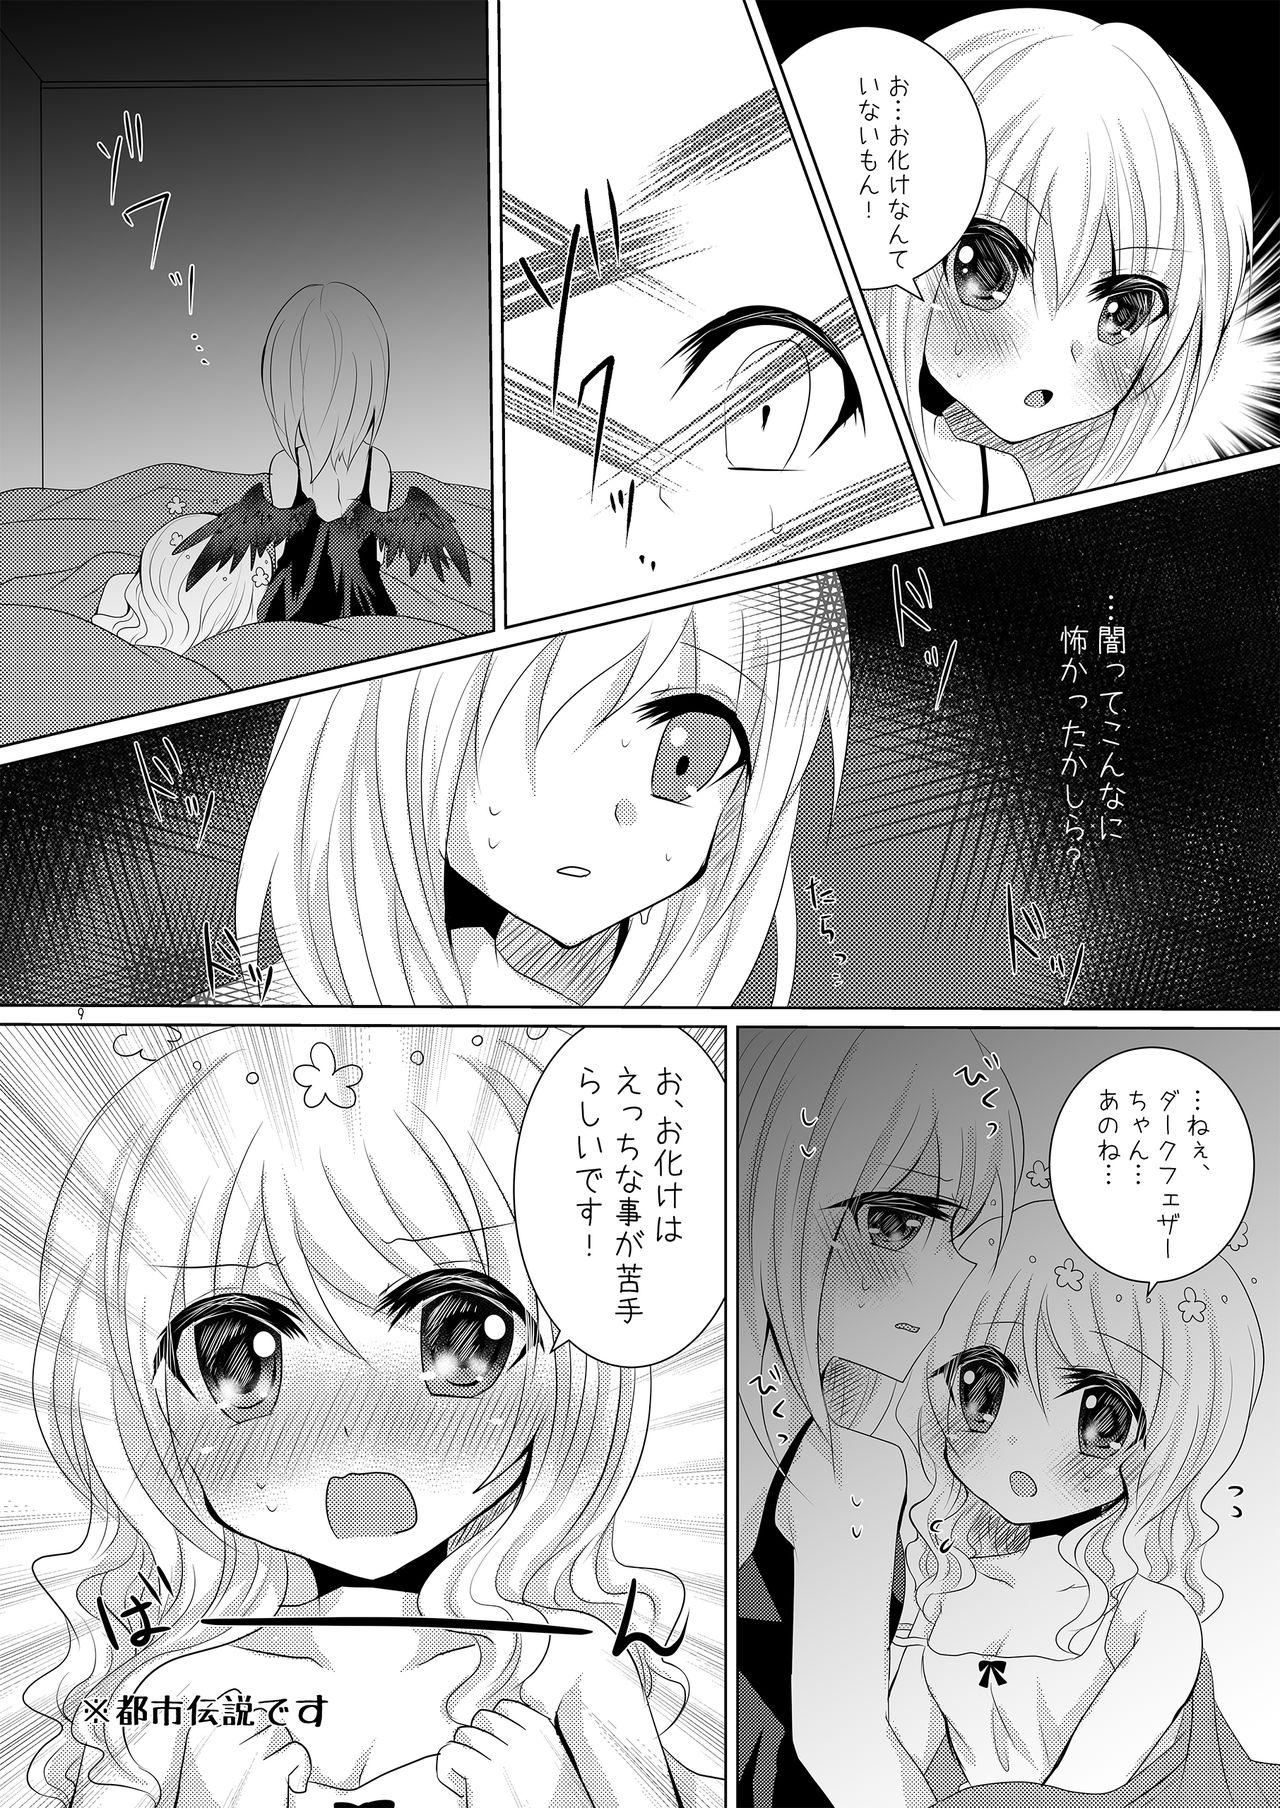 Huge Tenshi no Tawamure - Emil chronicle online Ex Gf - Page 8